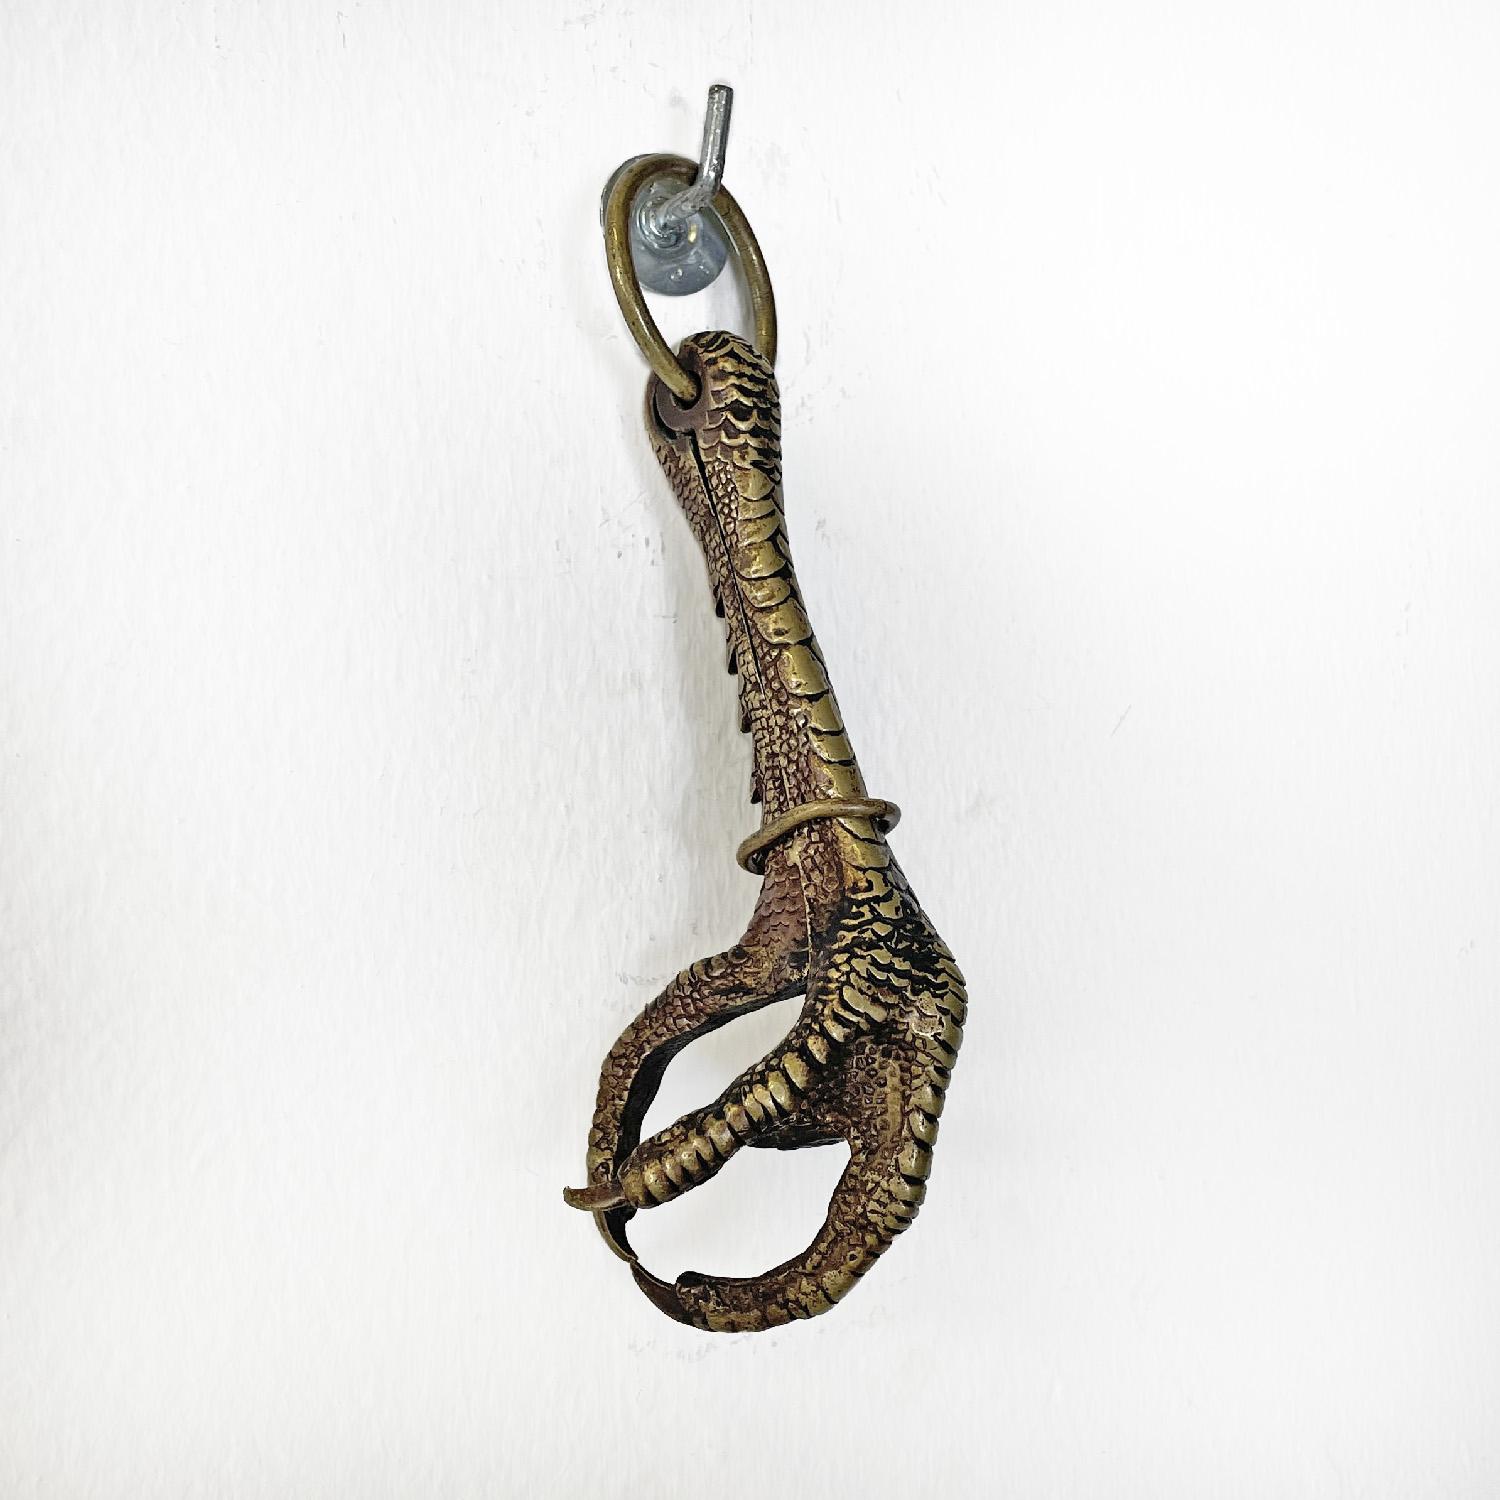 Italian antique bronze pheasant claw game-holder with hook, 1800s
Bronze pheasant claw game-holder. The structure is made up of two parts resembling the shape of pliers, they can be widened as desired and tightened using the bronze ellipse. It can